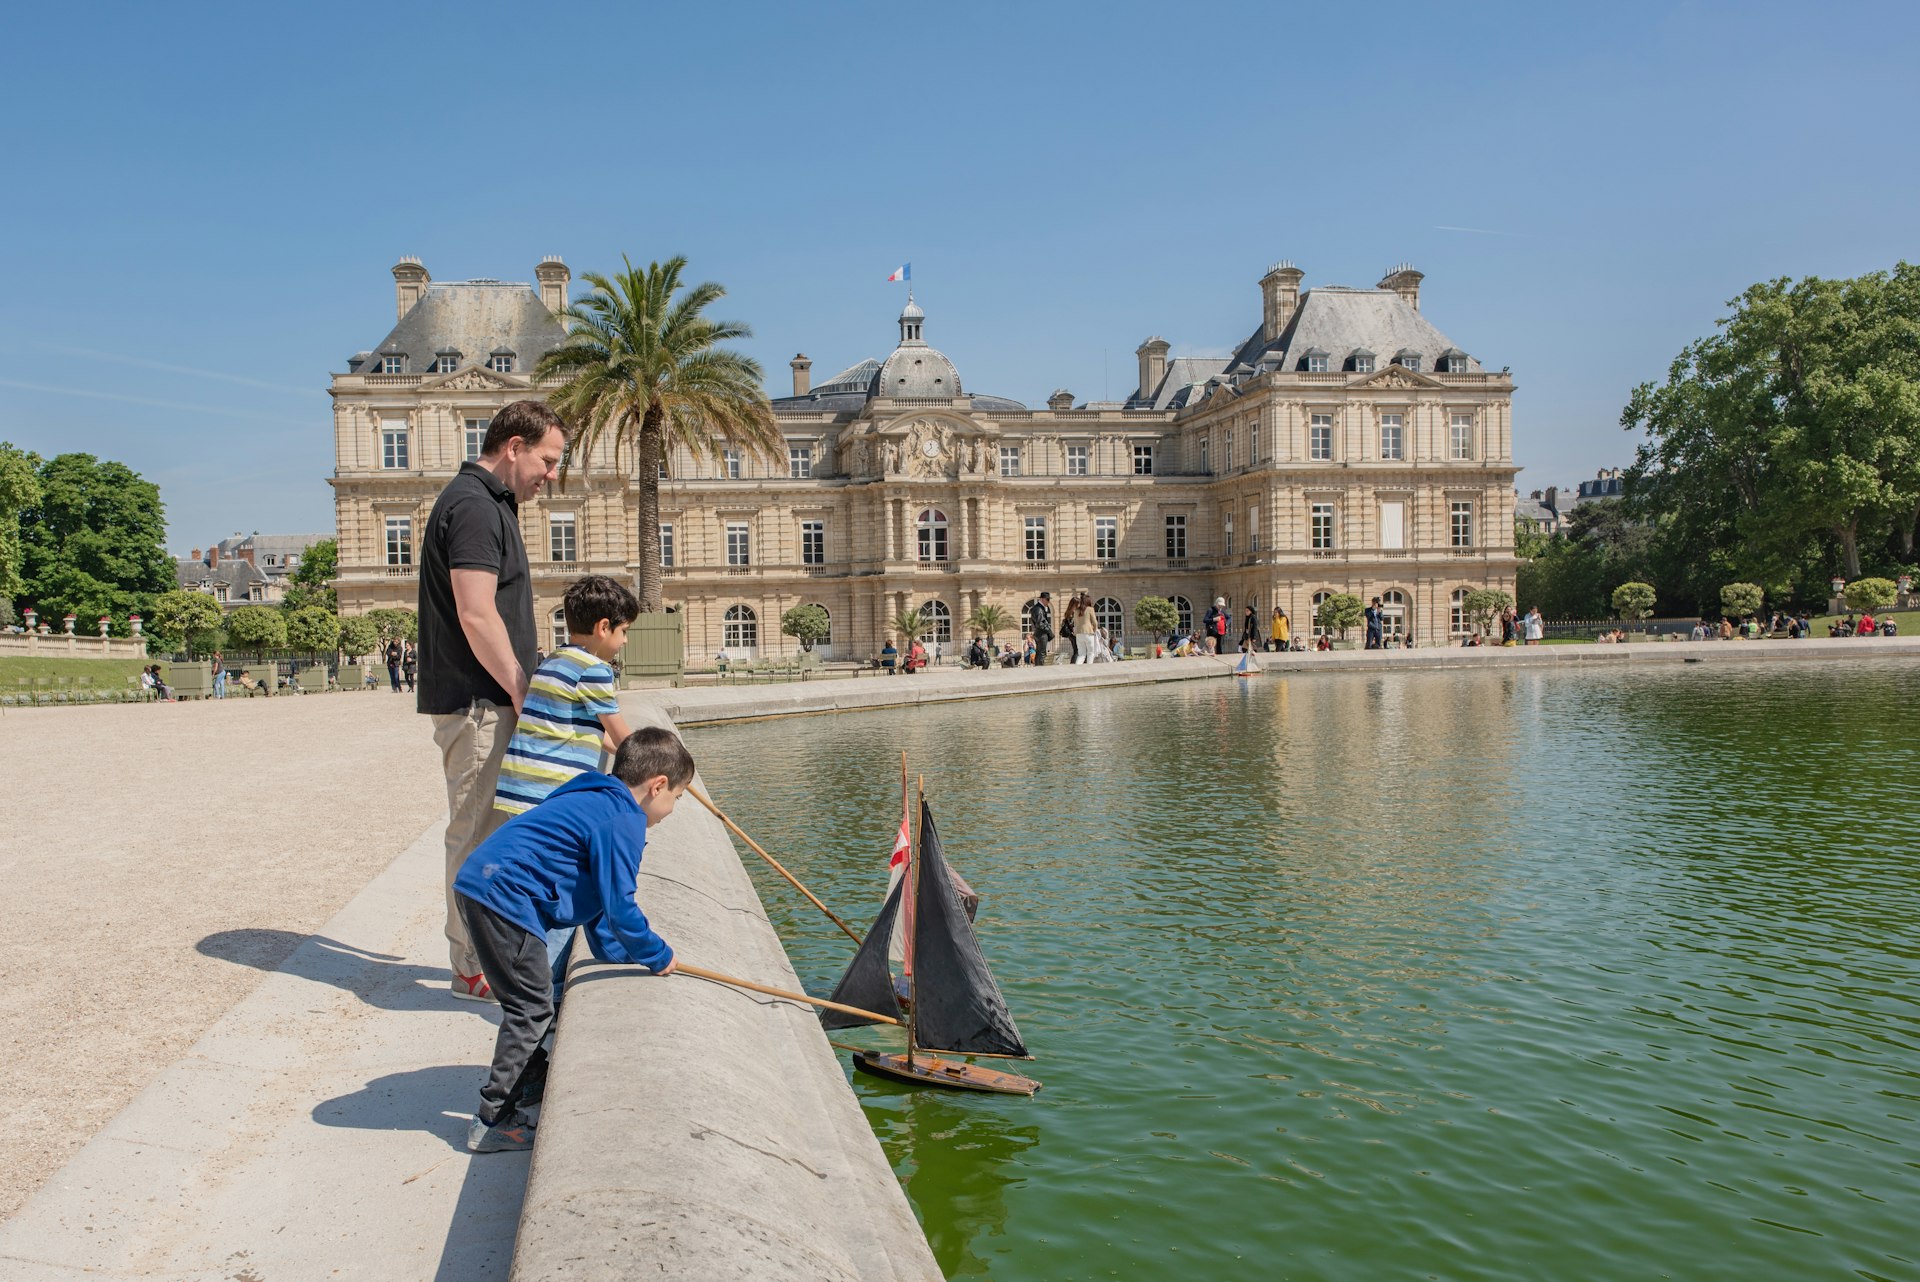  Children play with toy sail boats at the Luxembourg Palace and Gardens in the Montparnasse neighborhood. 